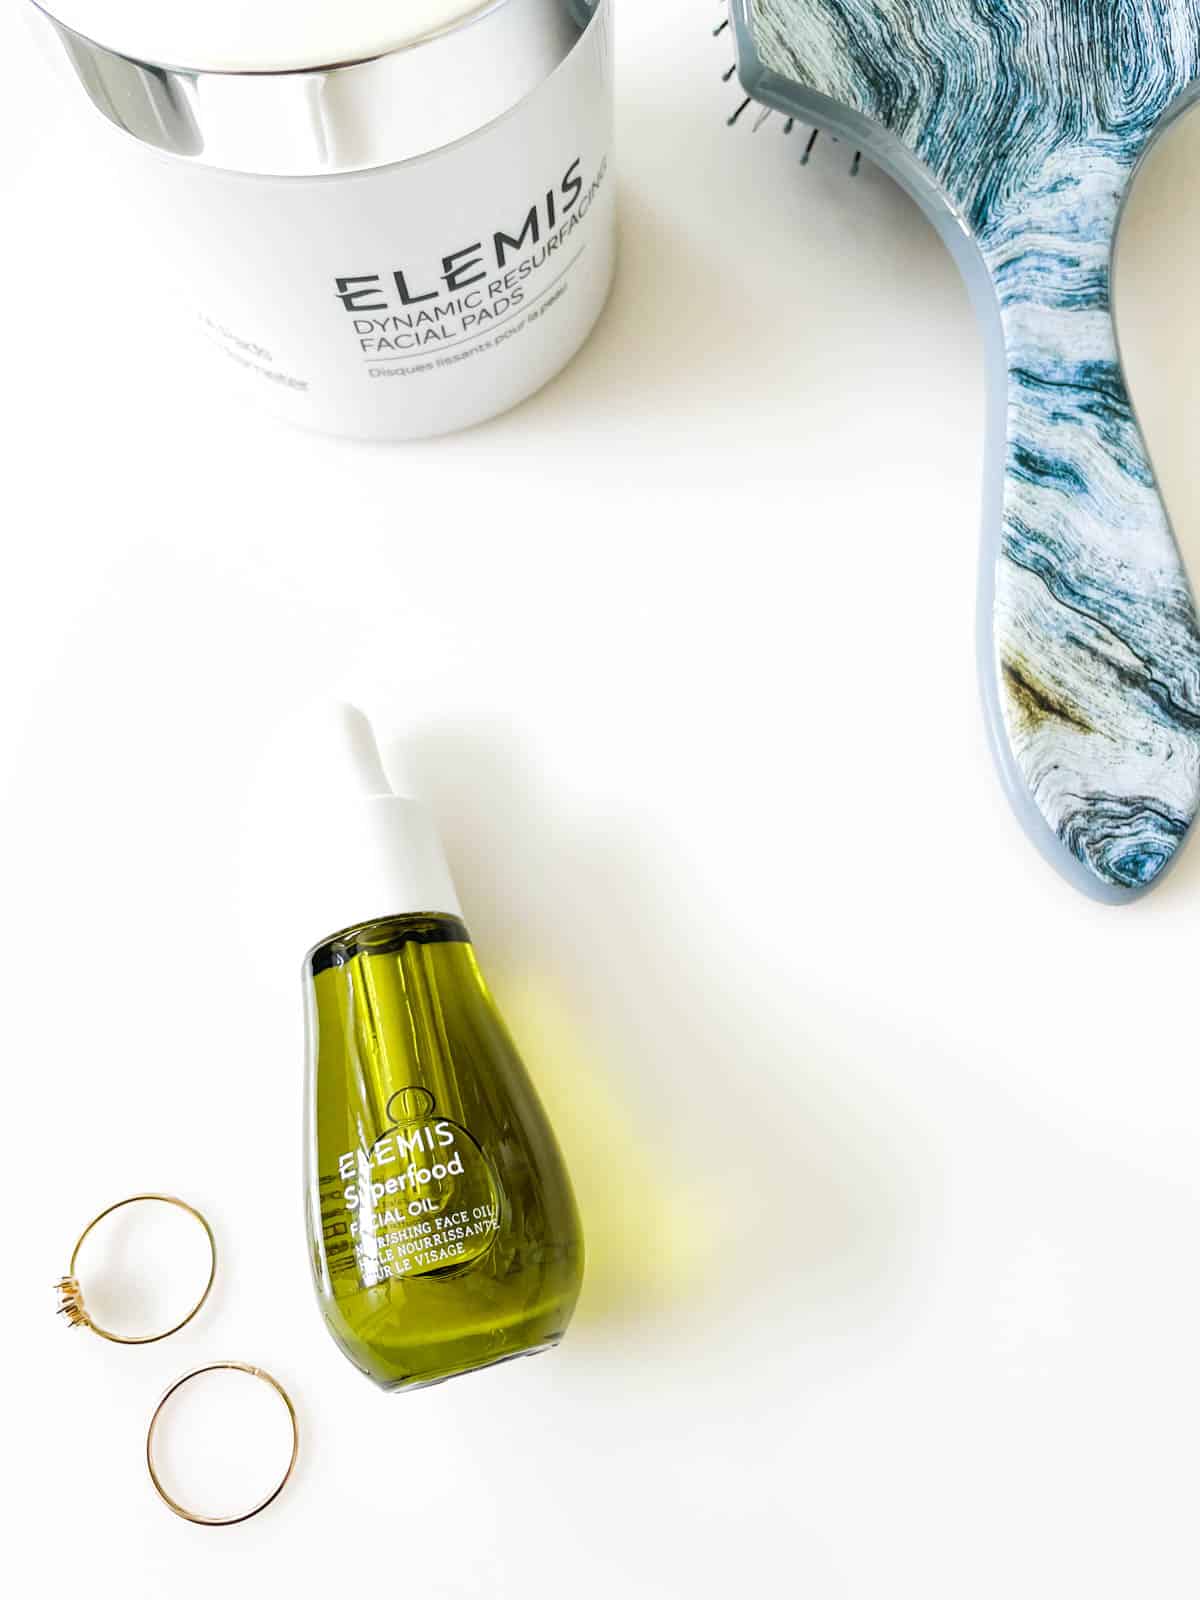 Elemis Superfood Facial Oil laying on a counter next to rings and a hairbrush.